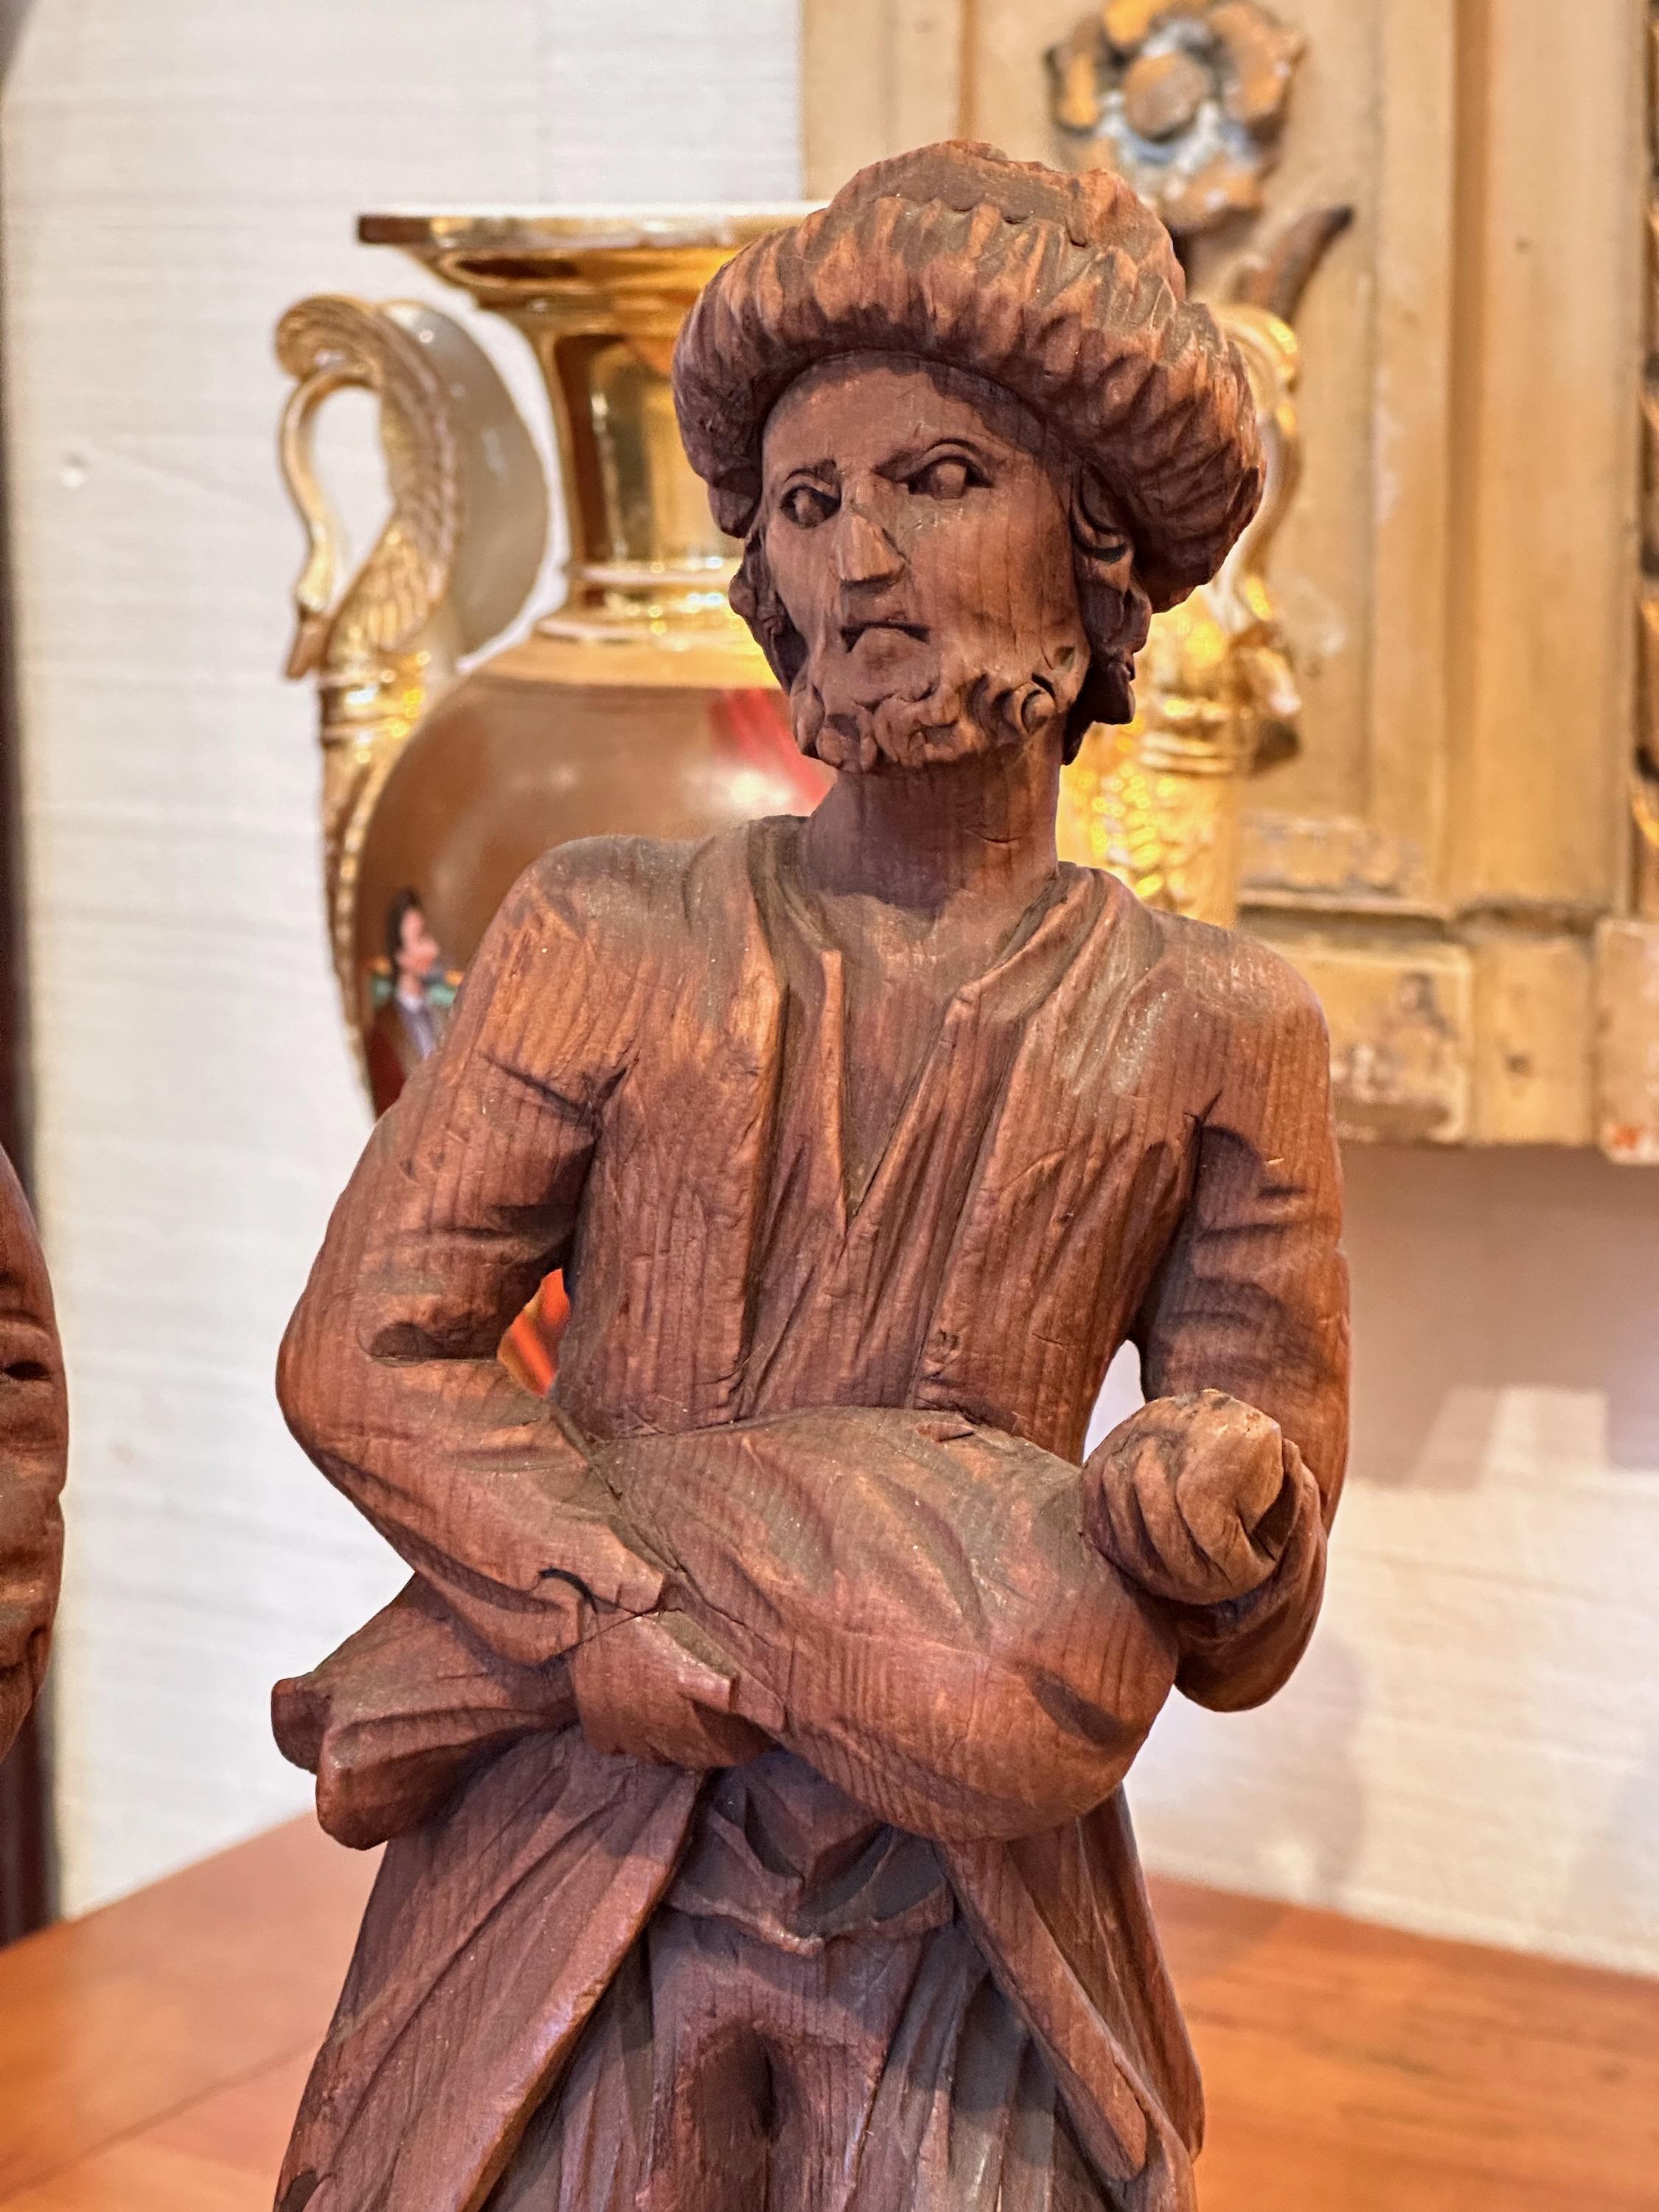 Peasant figures carved from wood. Great detail.